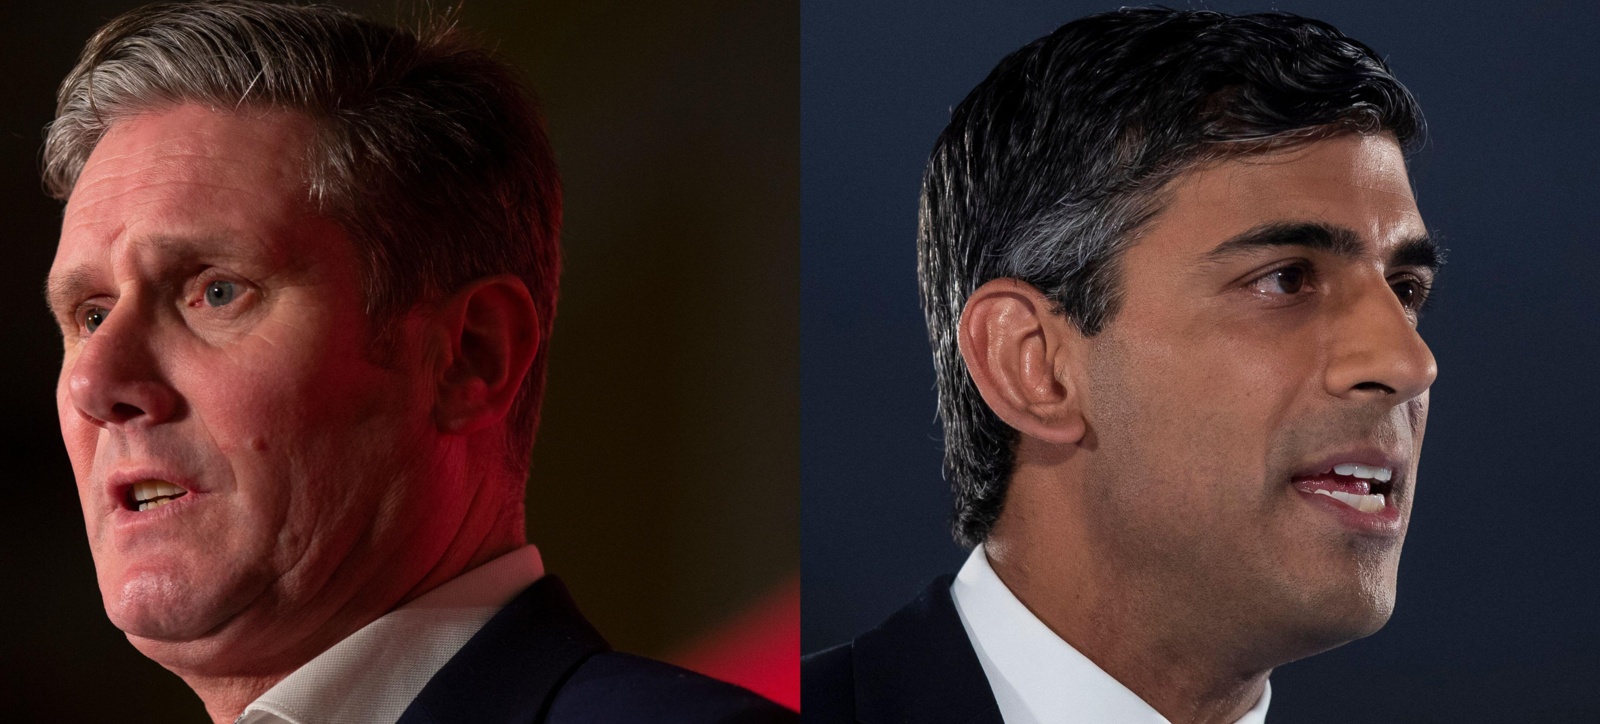 Photographs of Labour leader Kier Starmer and Prime Minister Rishi Sunak looking serious.